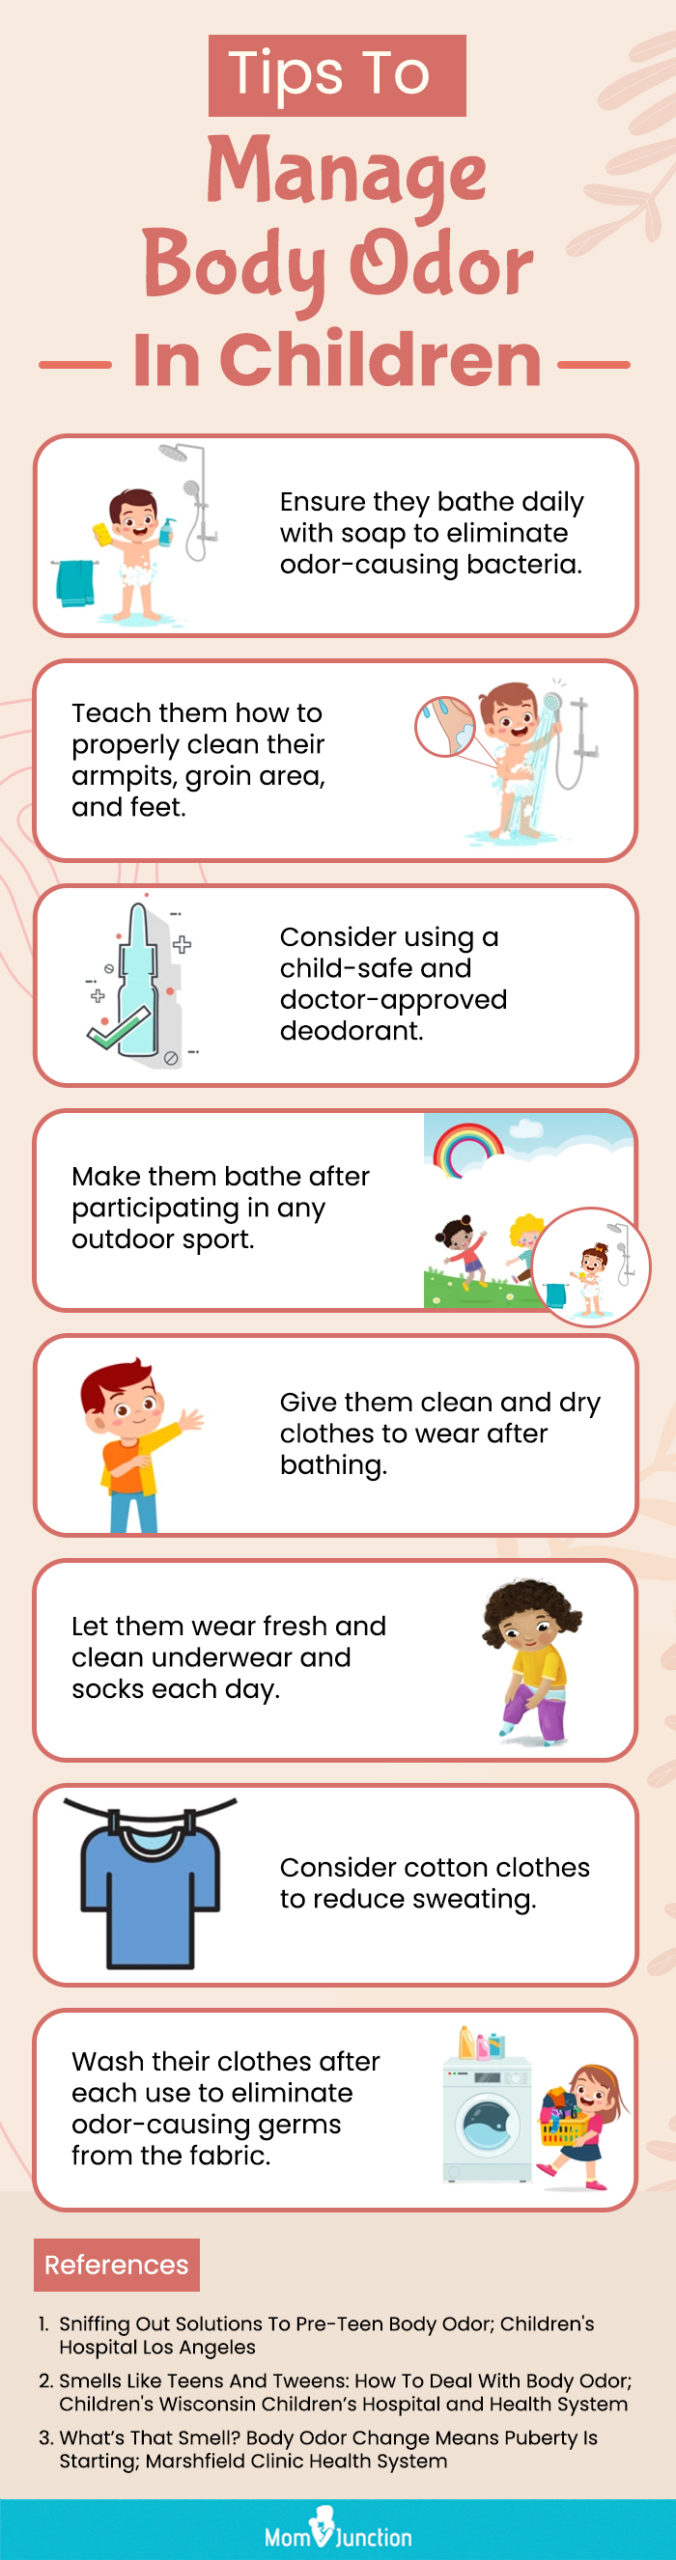 Tips To Manage Body Odor In Children (infographic)